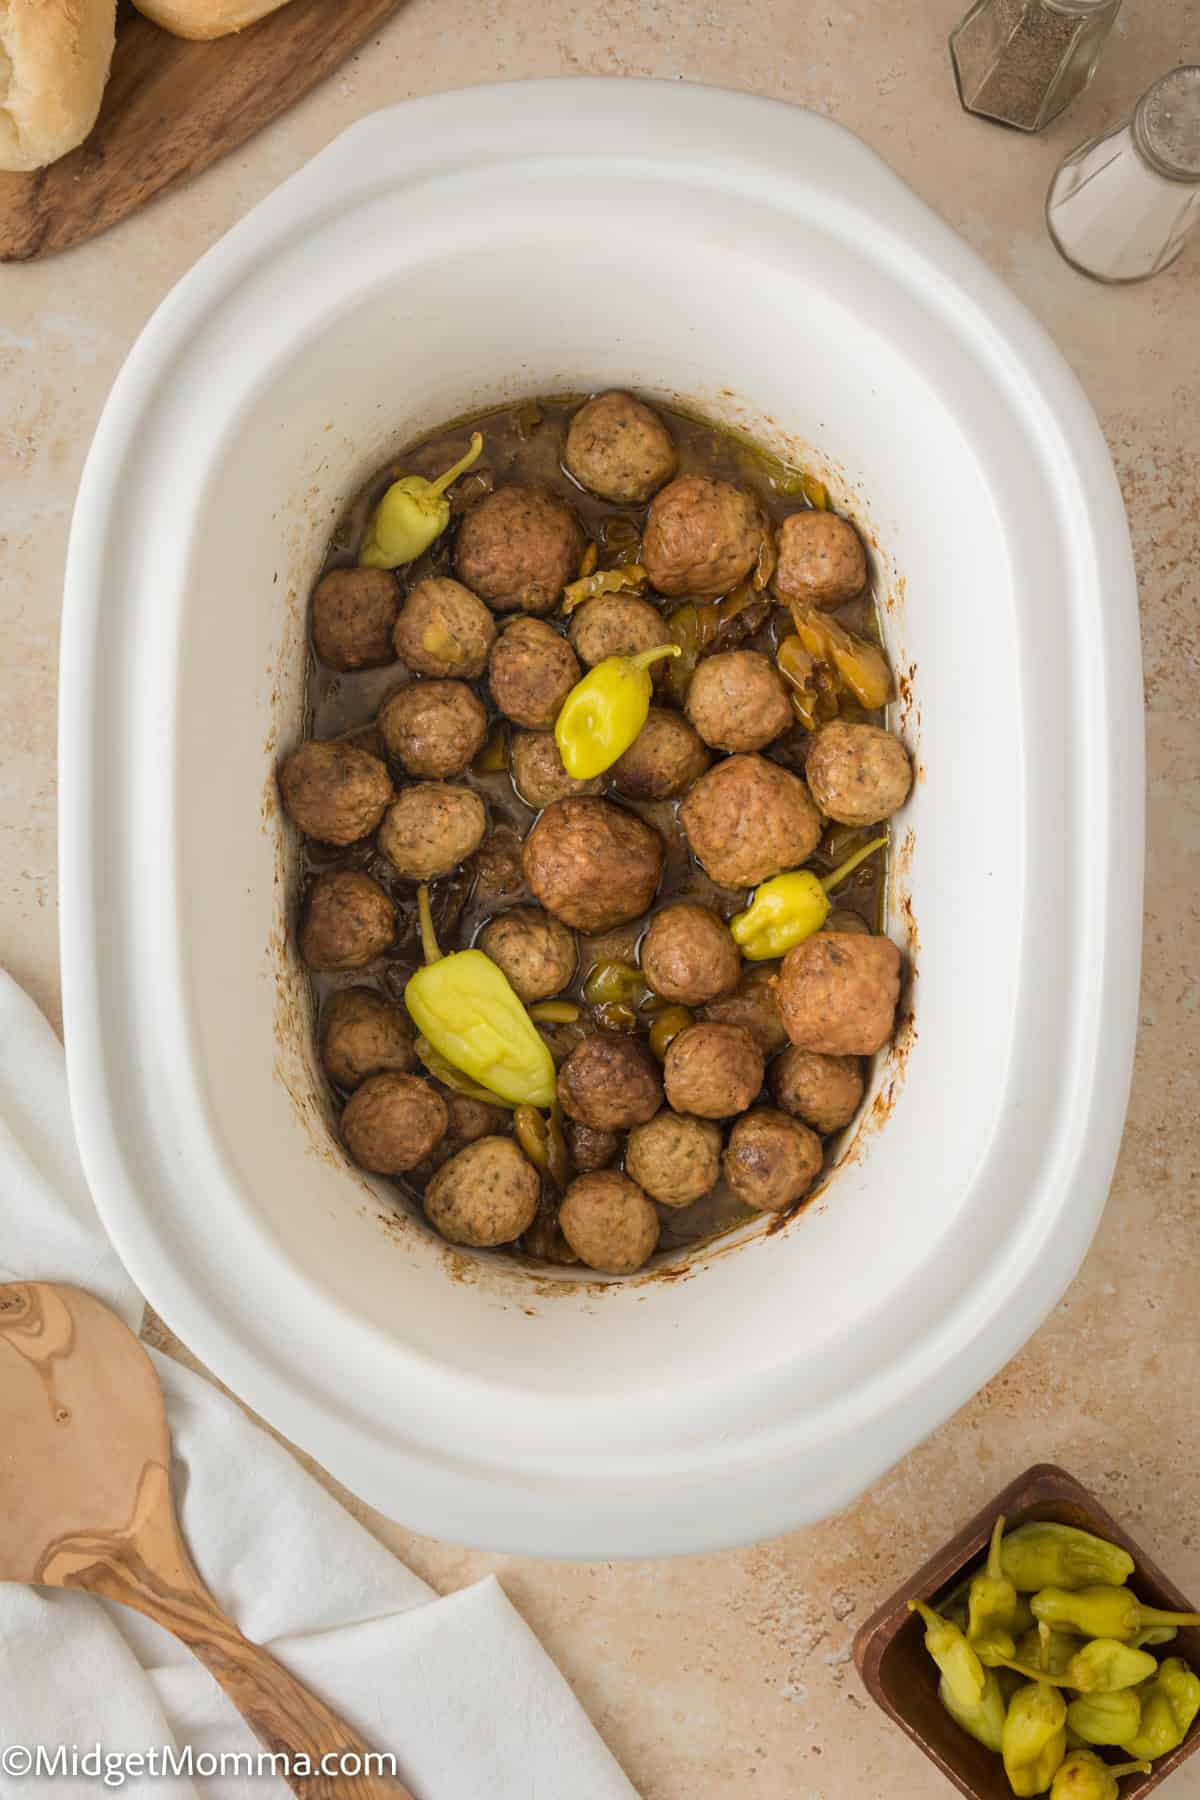 A white slow cooker filled with cooked meatballs and several whole pepperoncini peppers. A wooden spoon and a small bowl of additional pepperoncini are nearby.